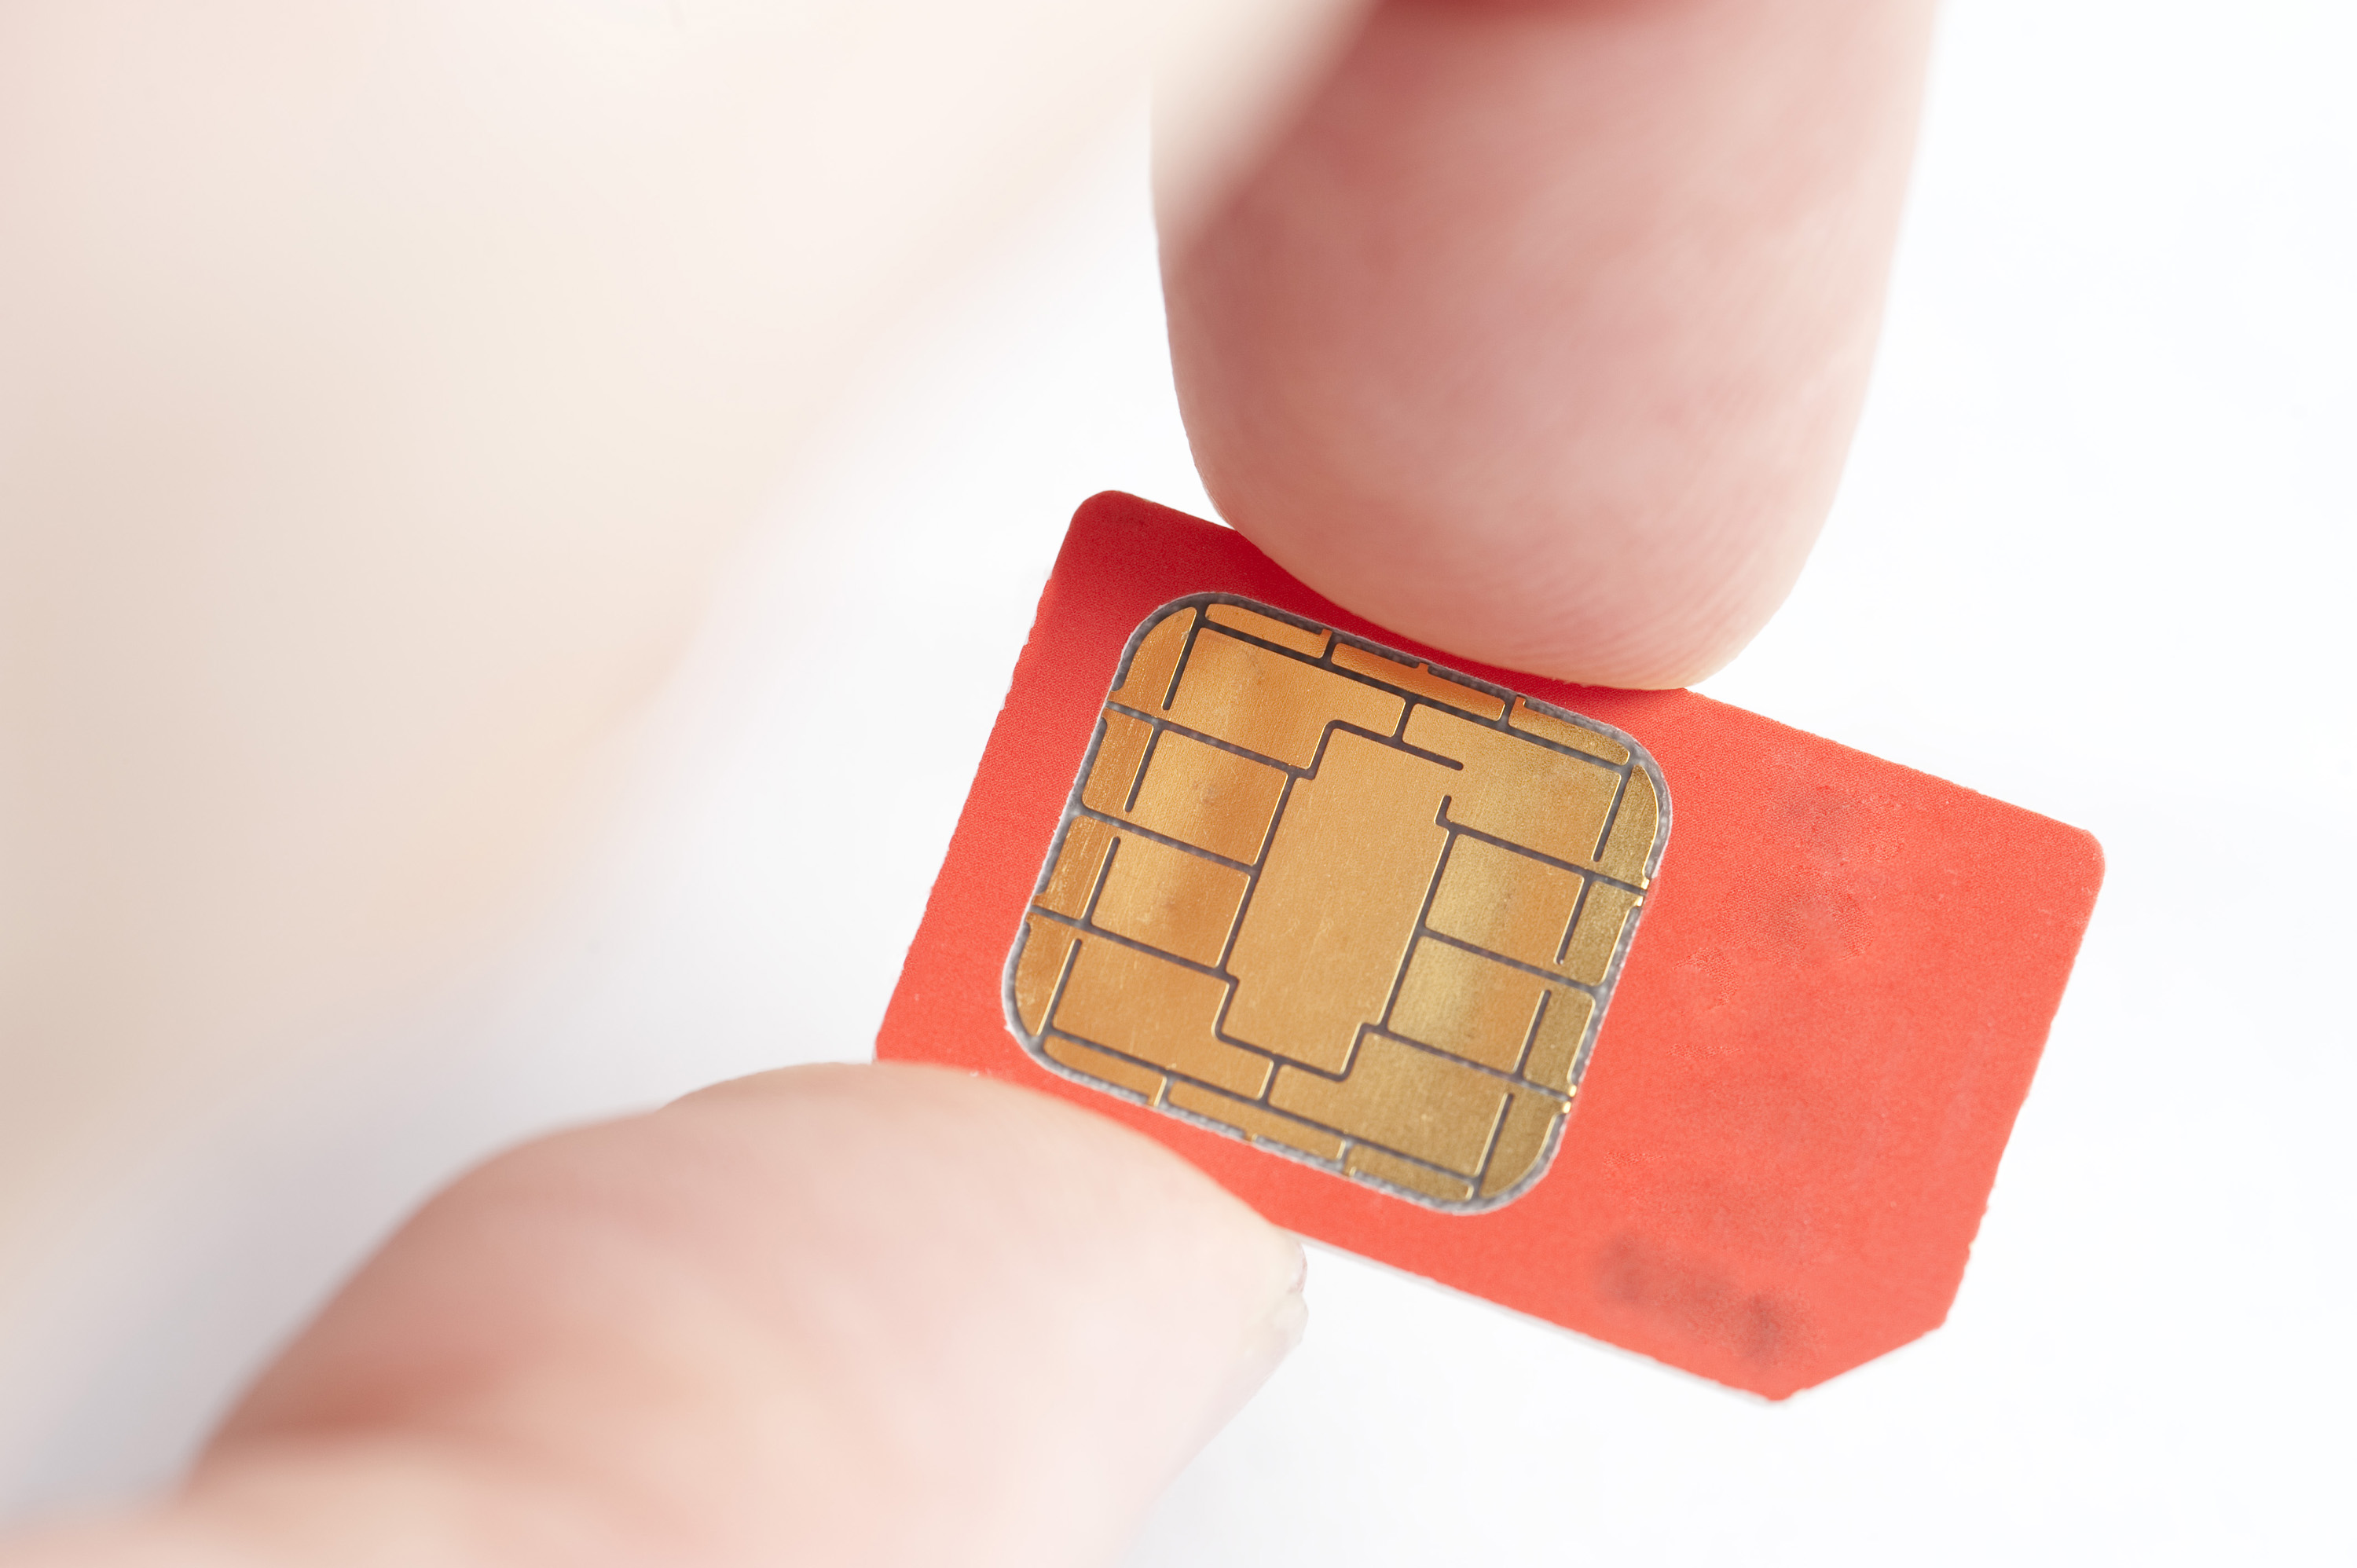 Free Stock Photo 4047-sim card | freeimageslive